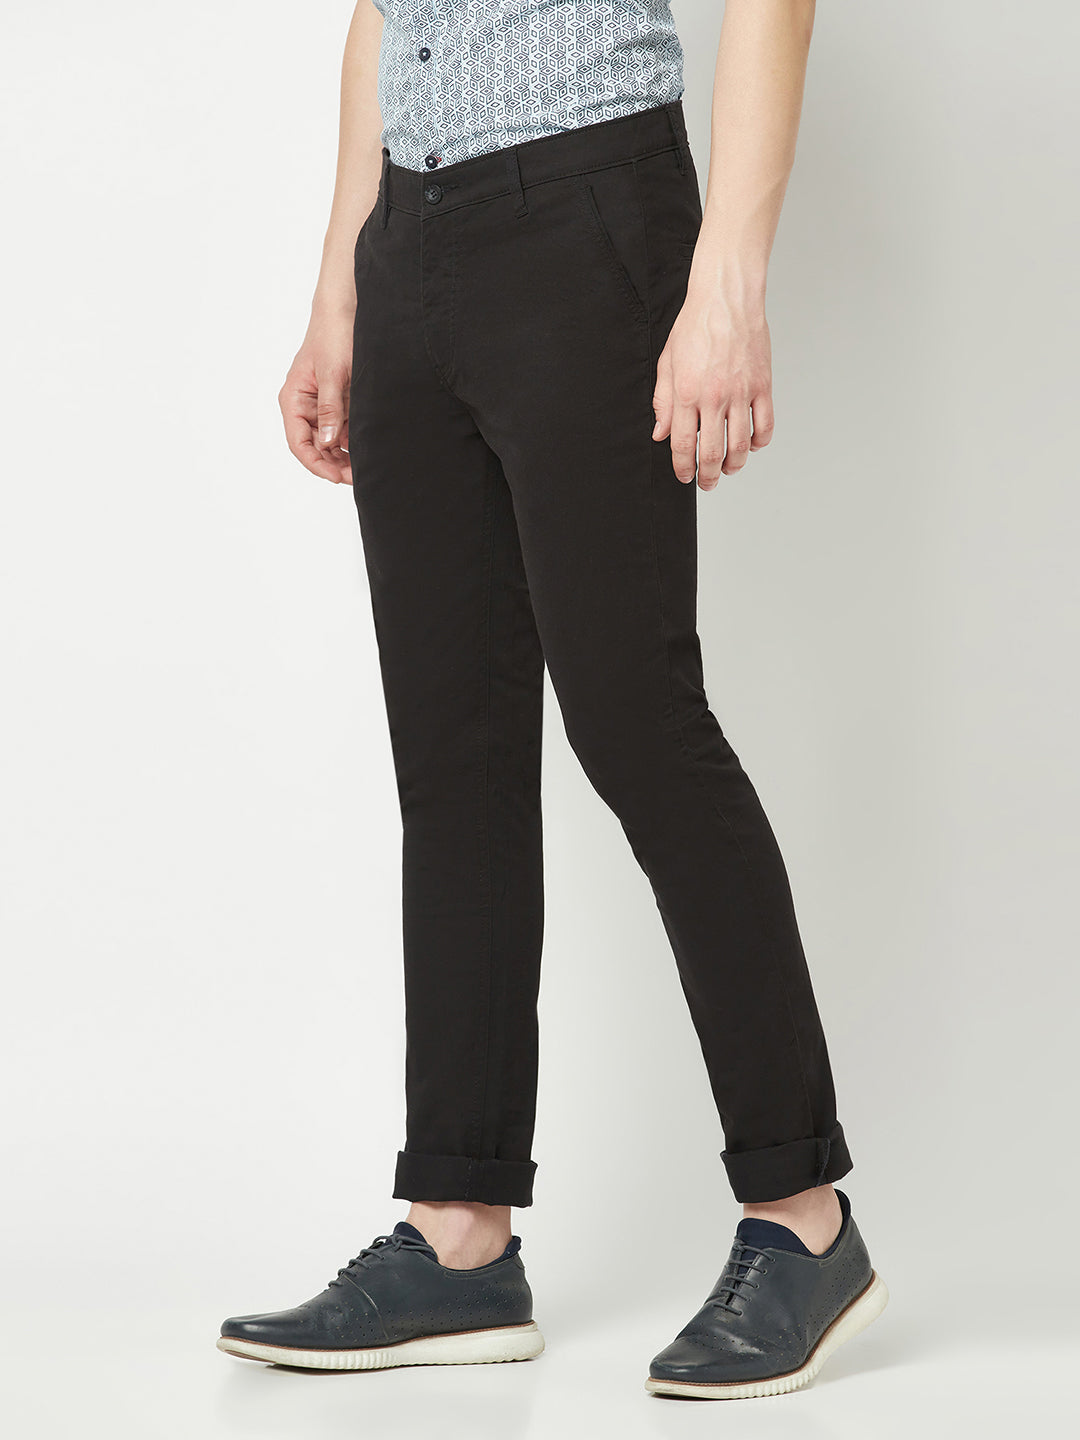  Black Business Trousers